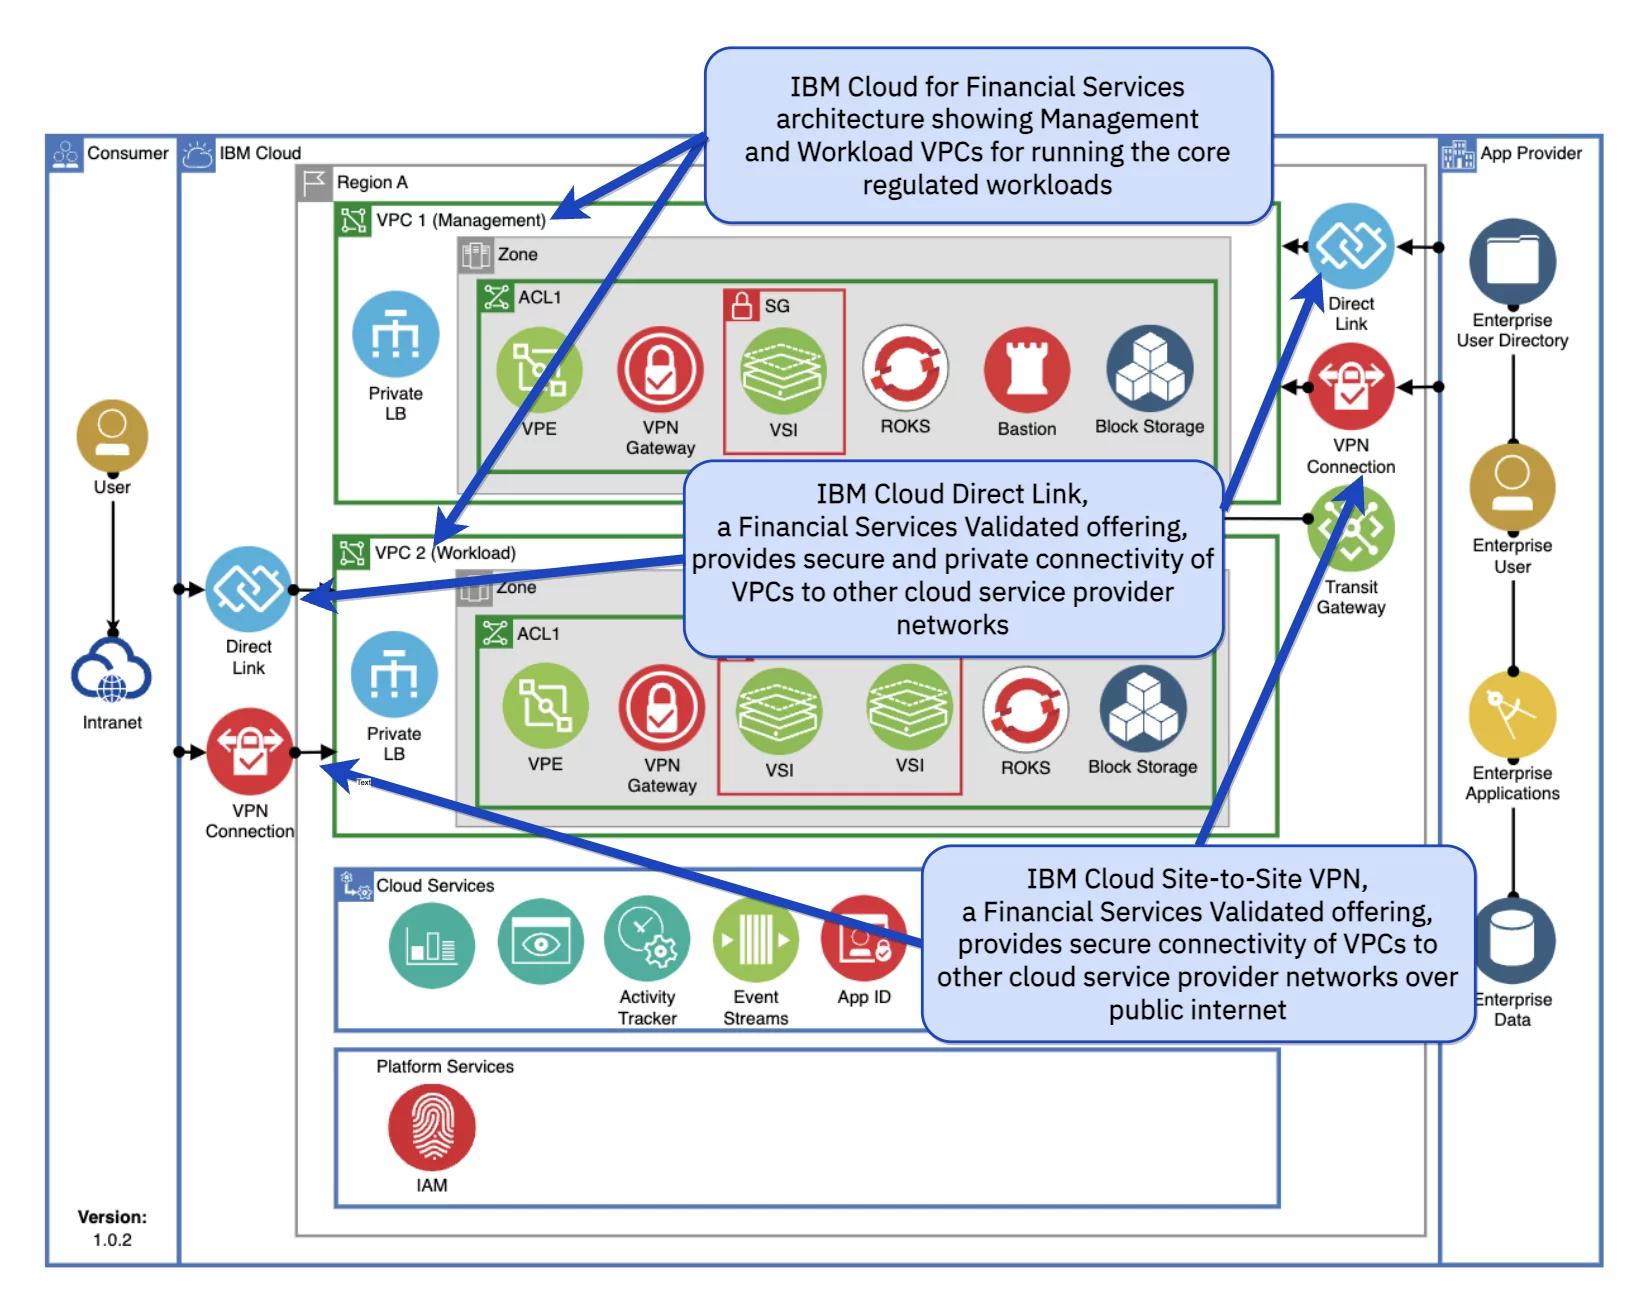 Figure 2: High-level VPC reference architecture for IBM Cloud for Financial Services showing Direct Link and VPN connectivity.